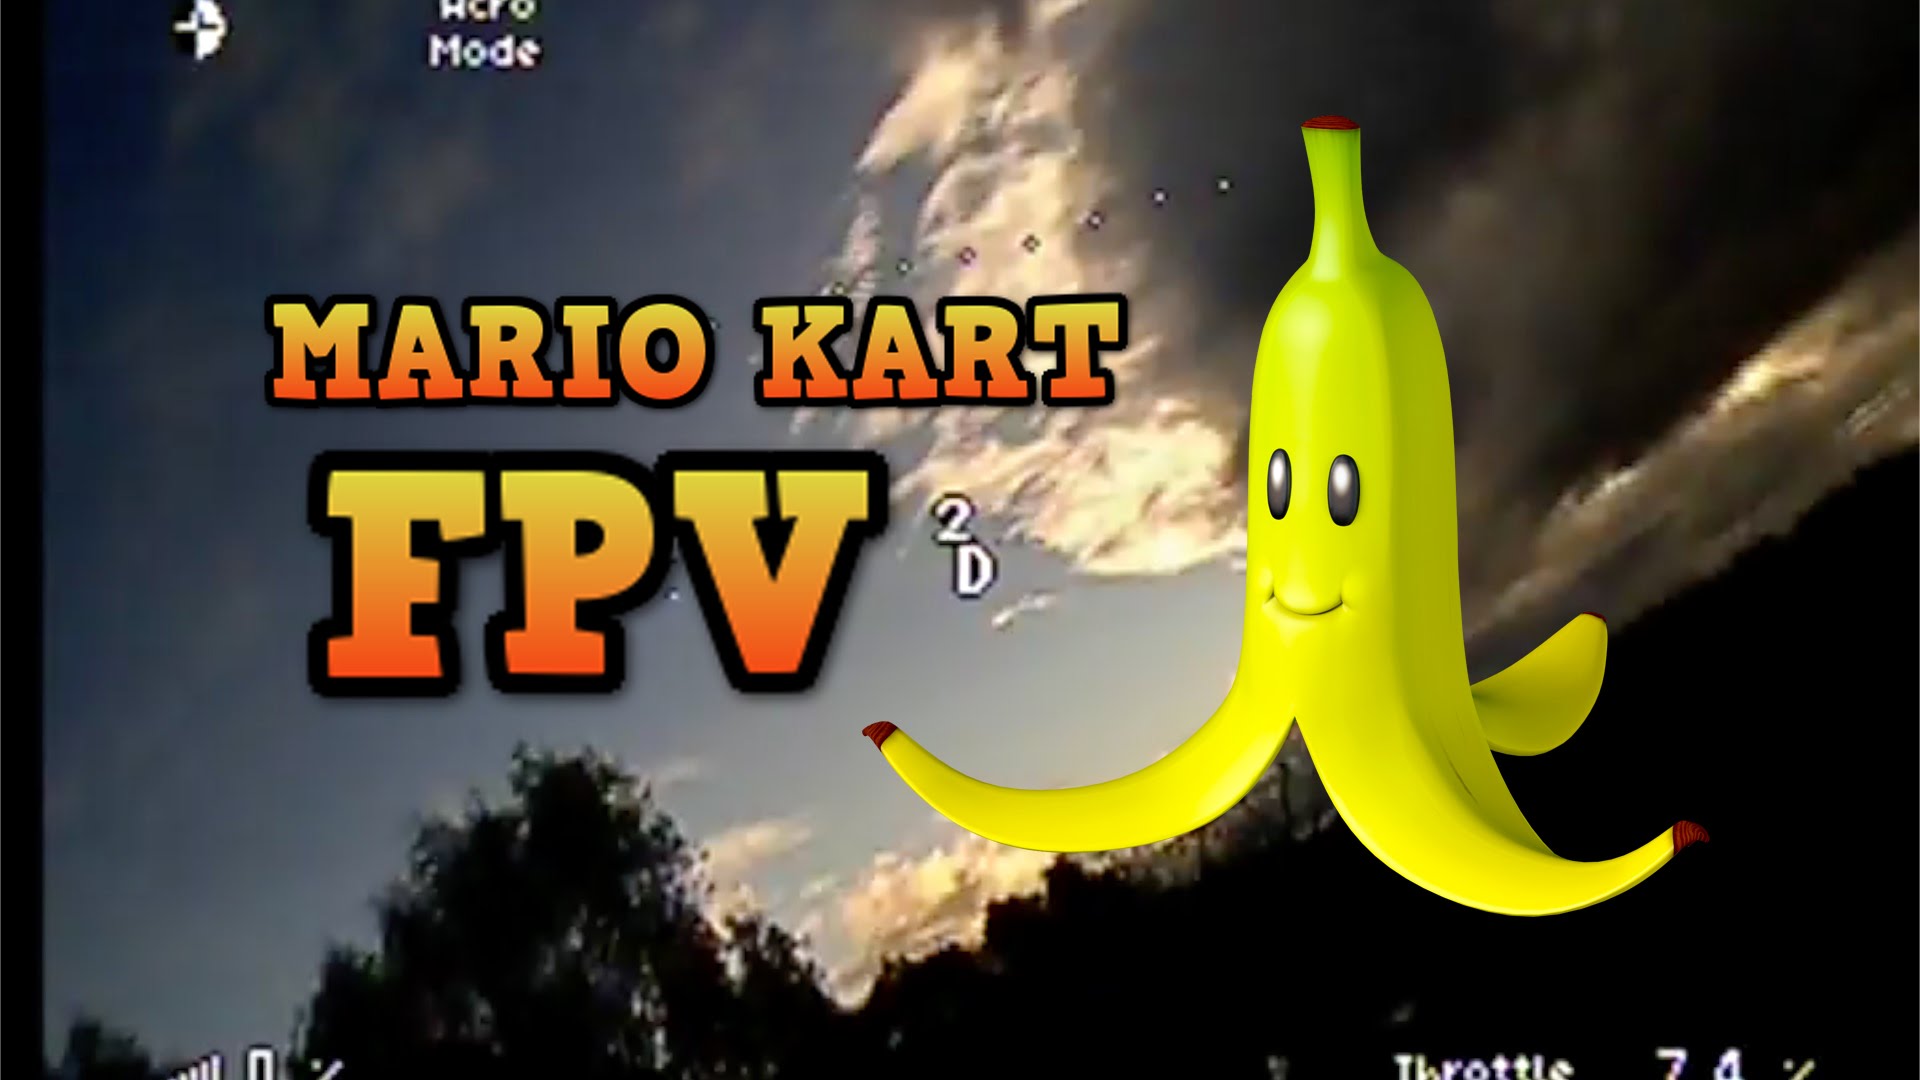 When your FPV racing drone hits a banana from Mario Kart